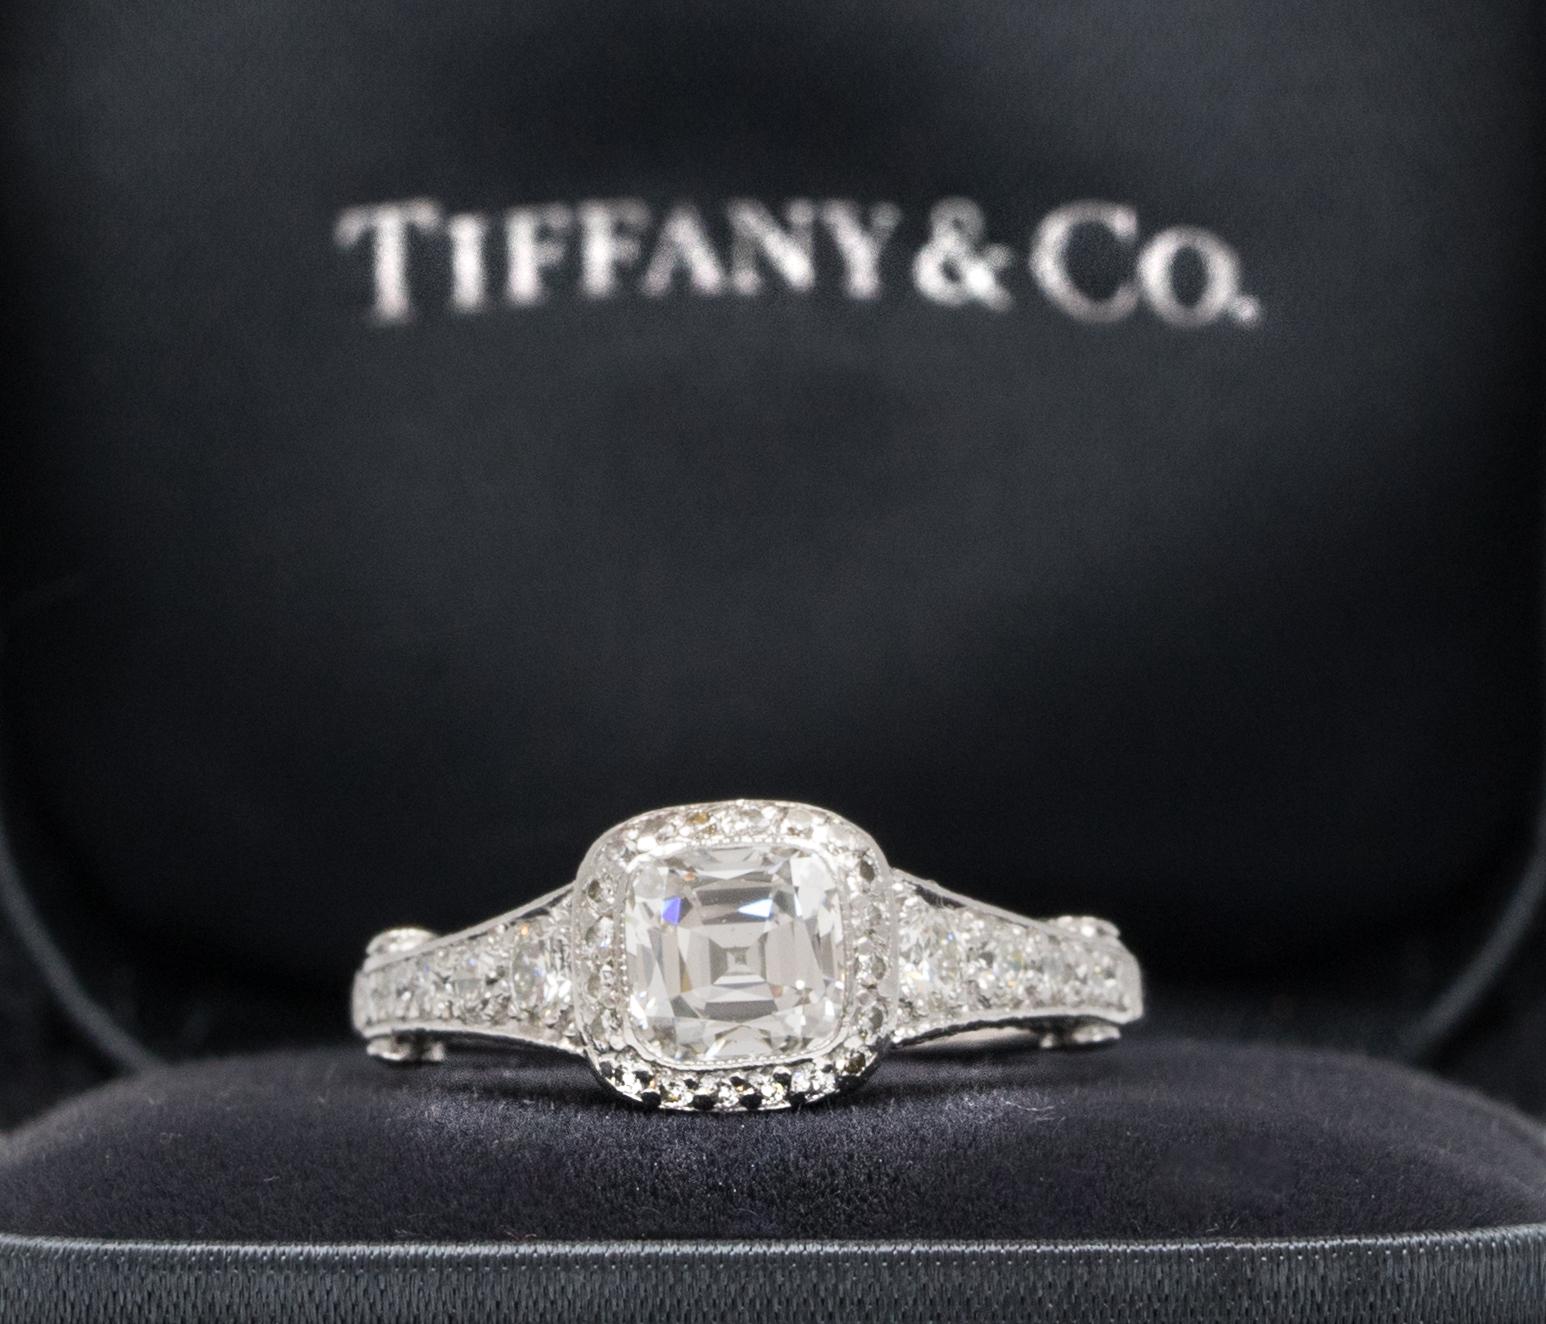 Tiffany Legacy® Engagement Ring with a Diamond Band signed by Tiffany & Co. featuring a 1.18 ct Cushion-Cut Center, graded D color , and VVS1 Clarity, in Platinum.

Includes Original Tiffany Certificate, and Box
Retail Appraisal from Tiffany & Co: